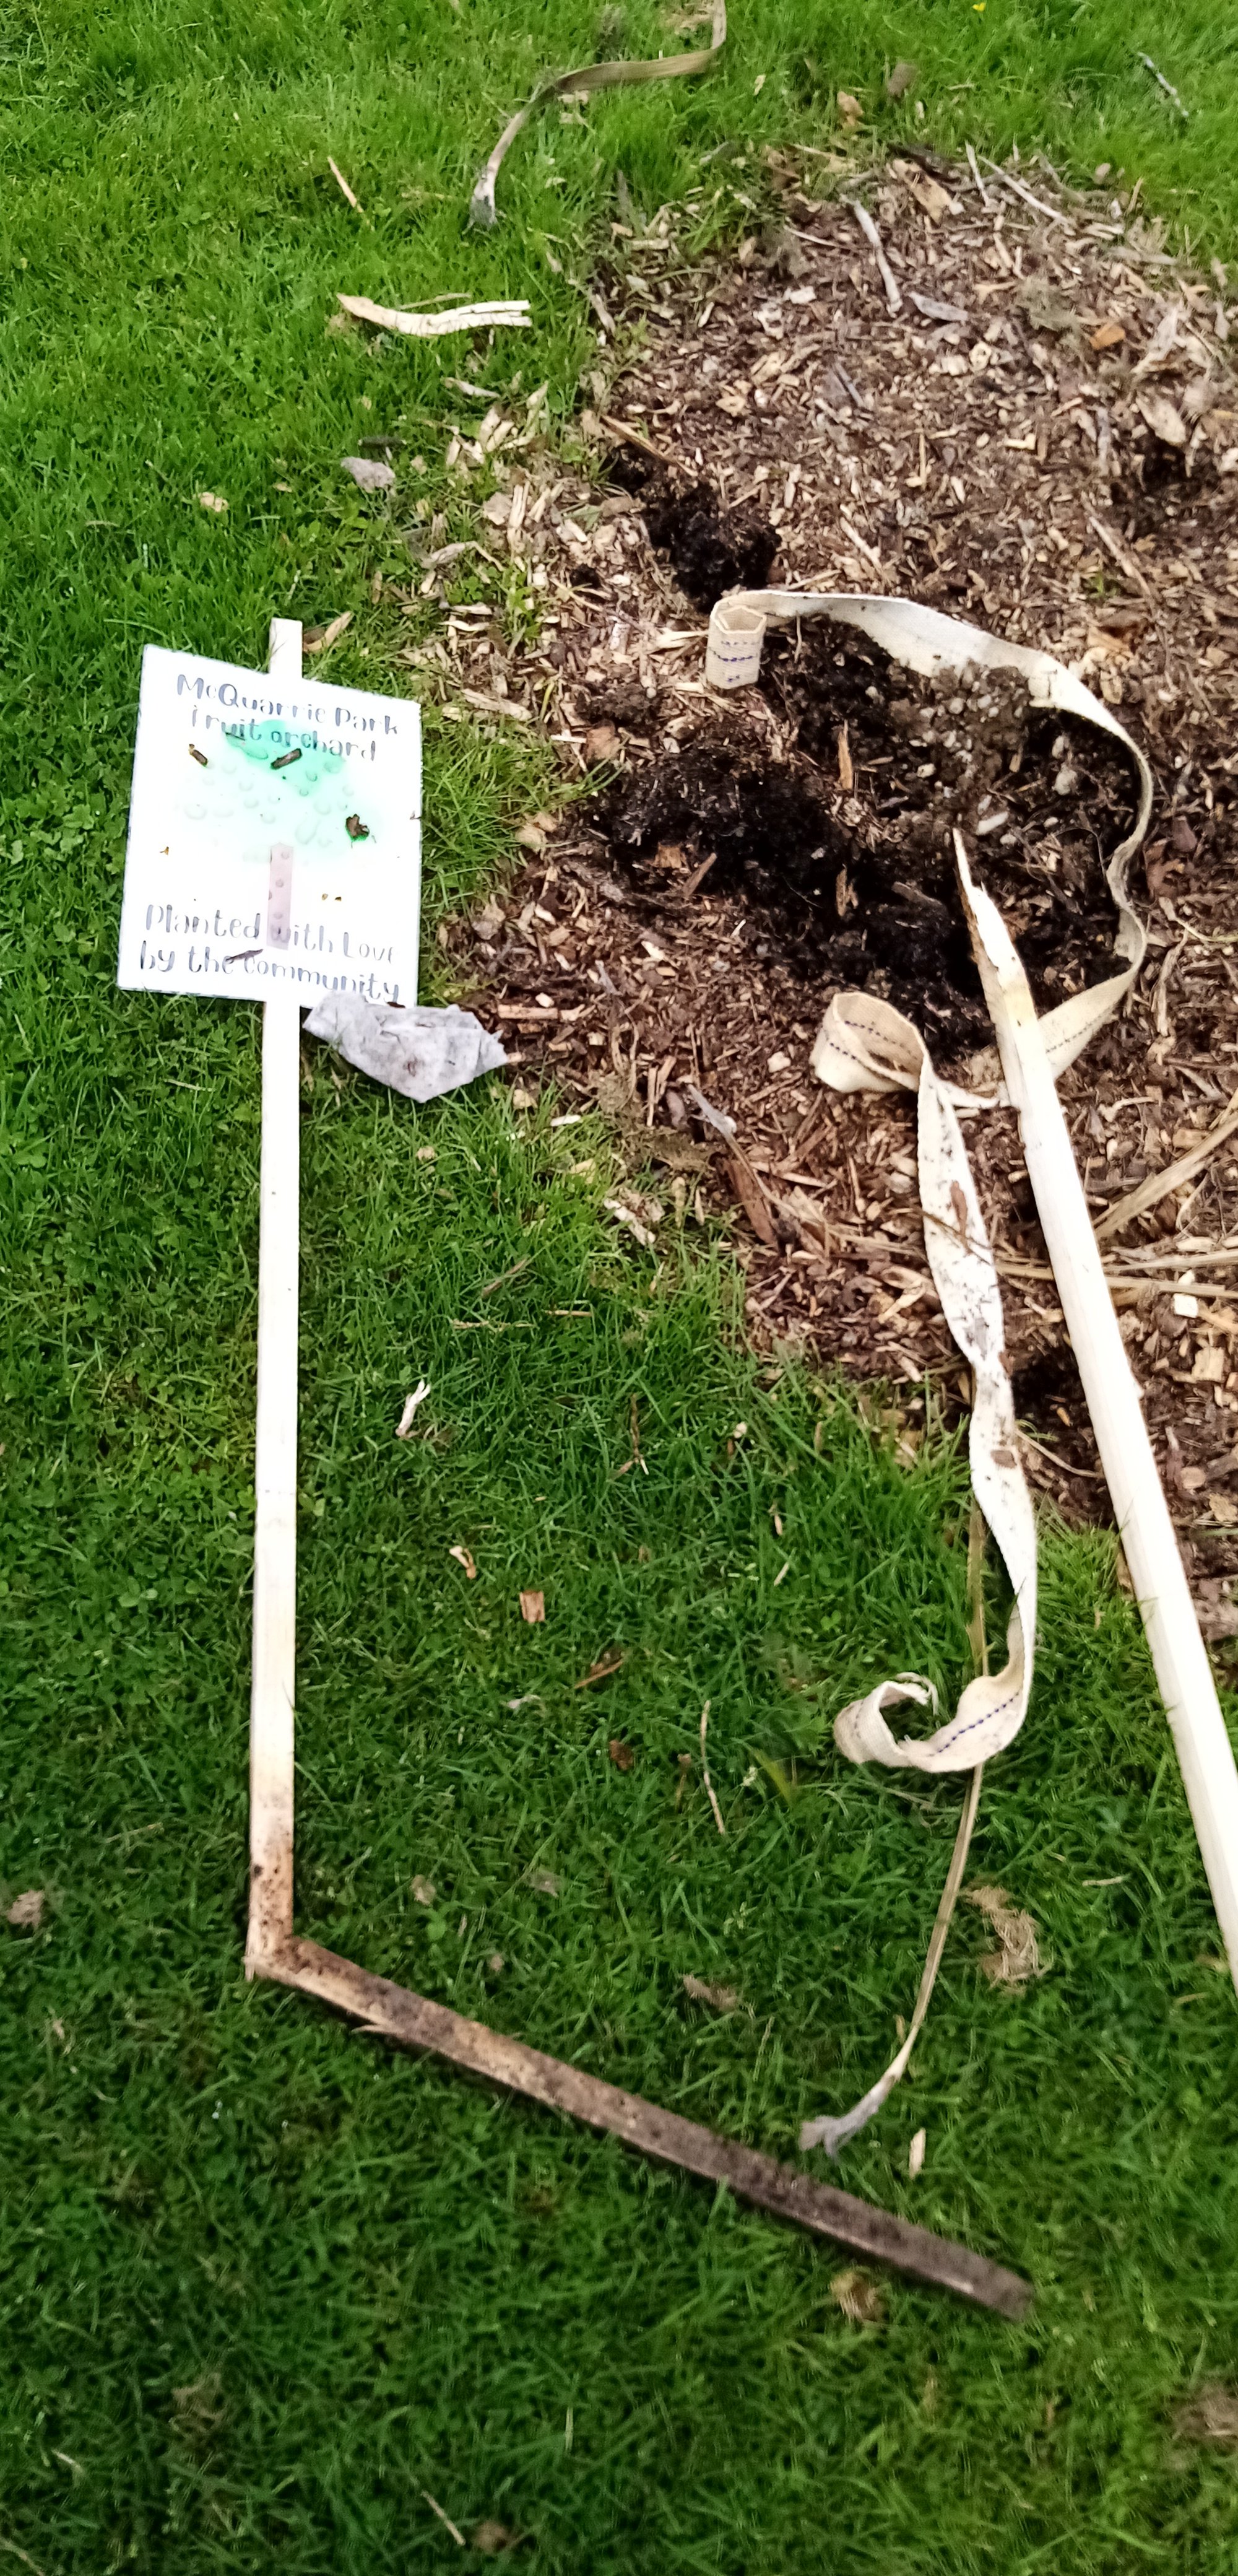 McQuarrie Park Community Orchard in Invercargill was again vandalised over the weekend....